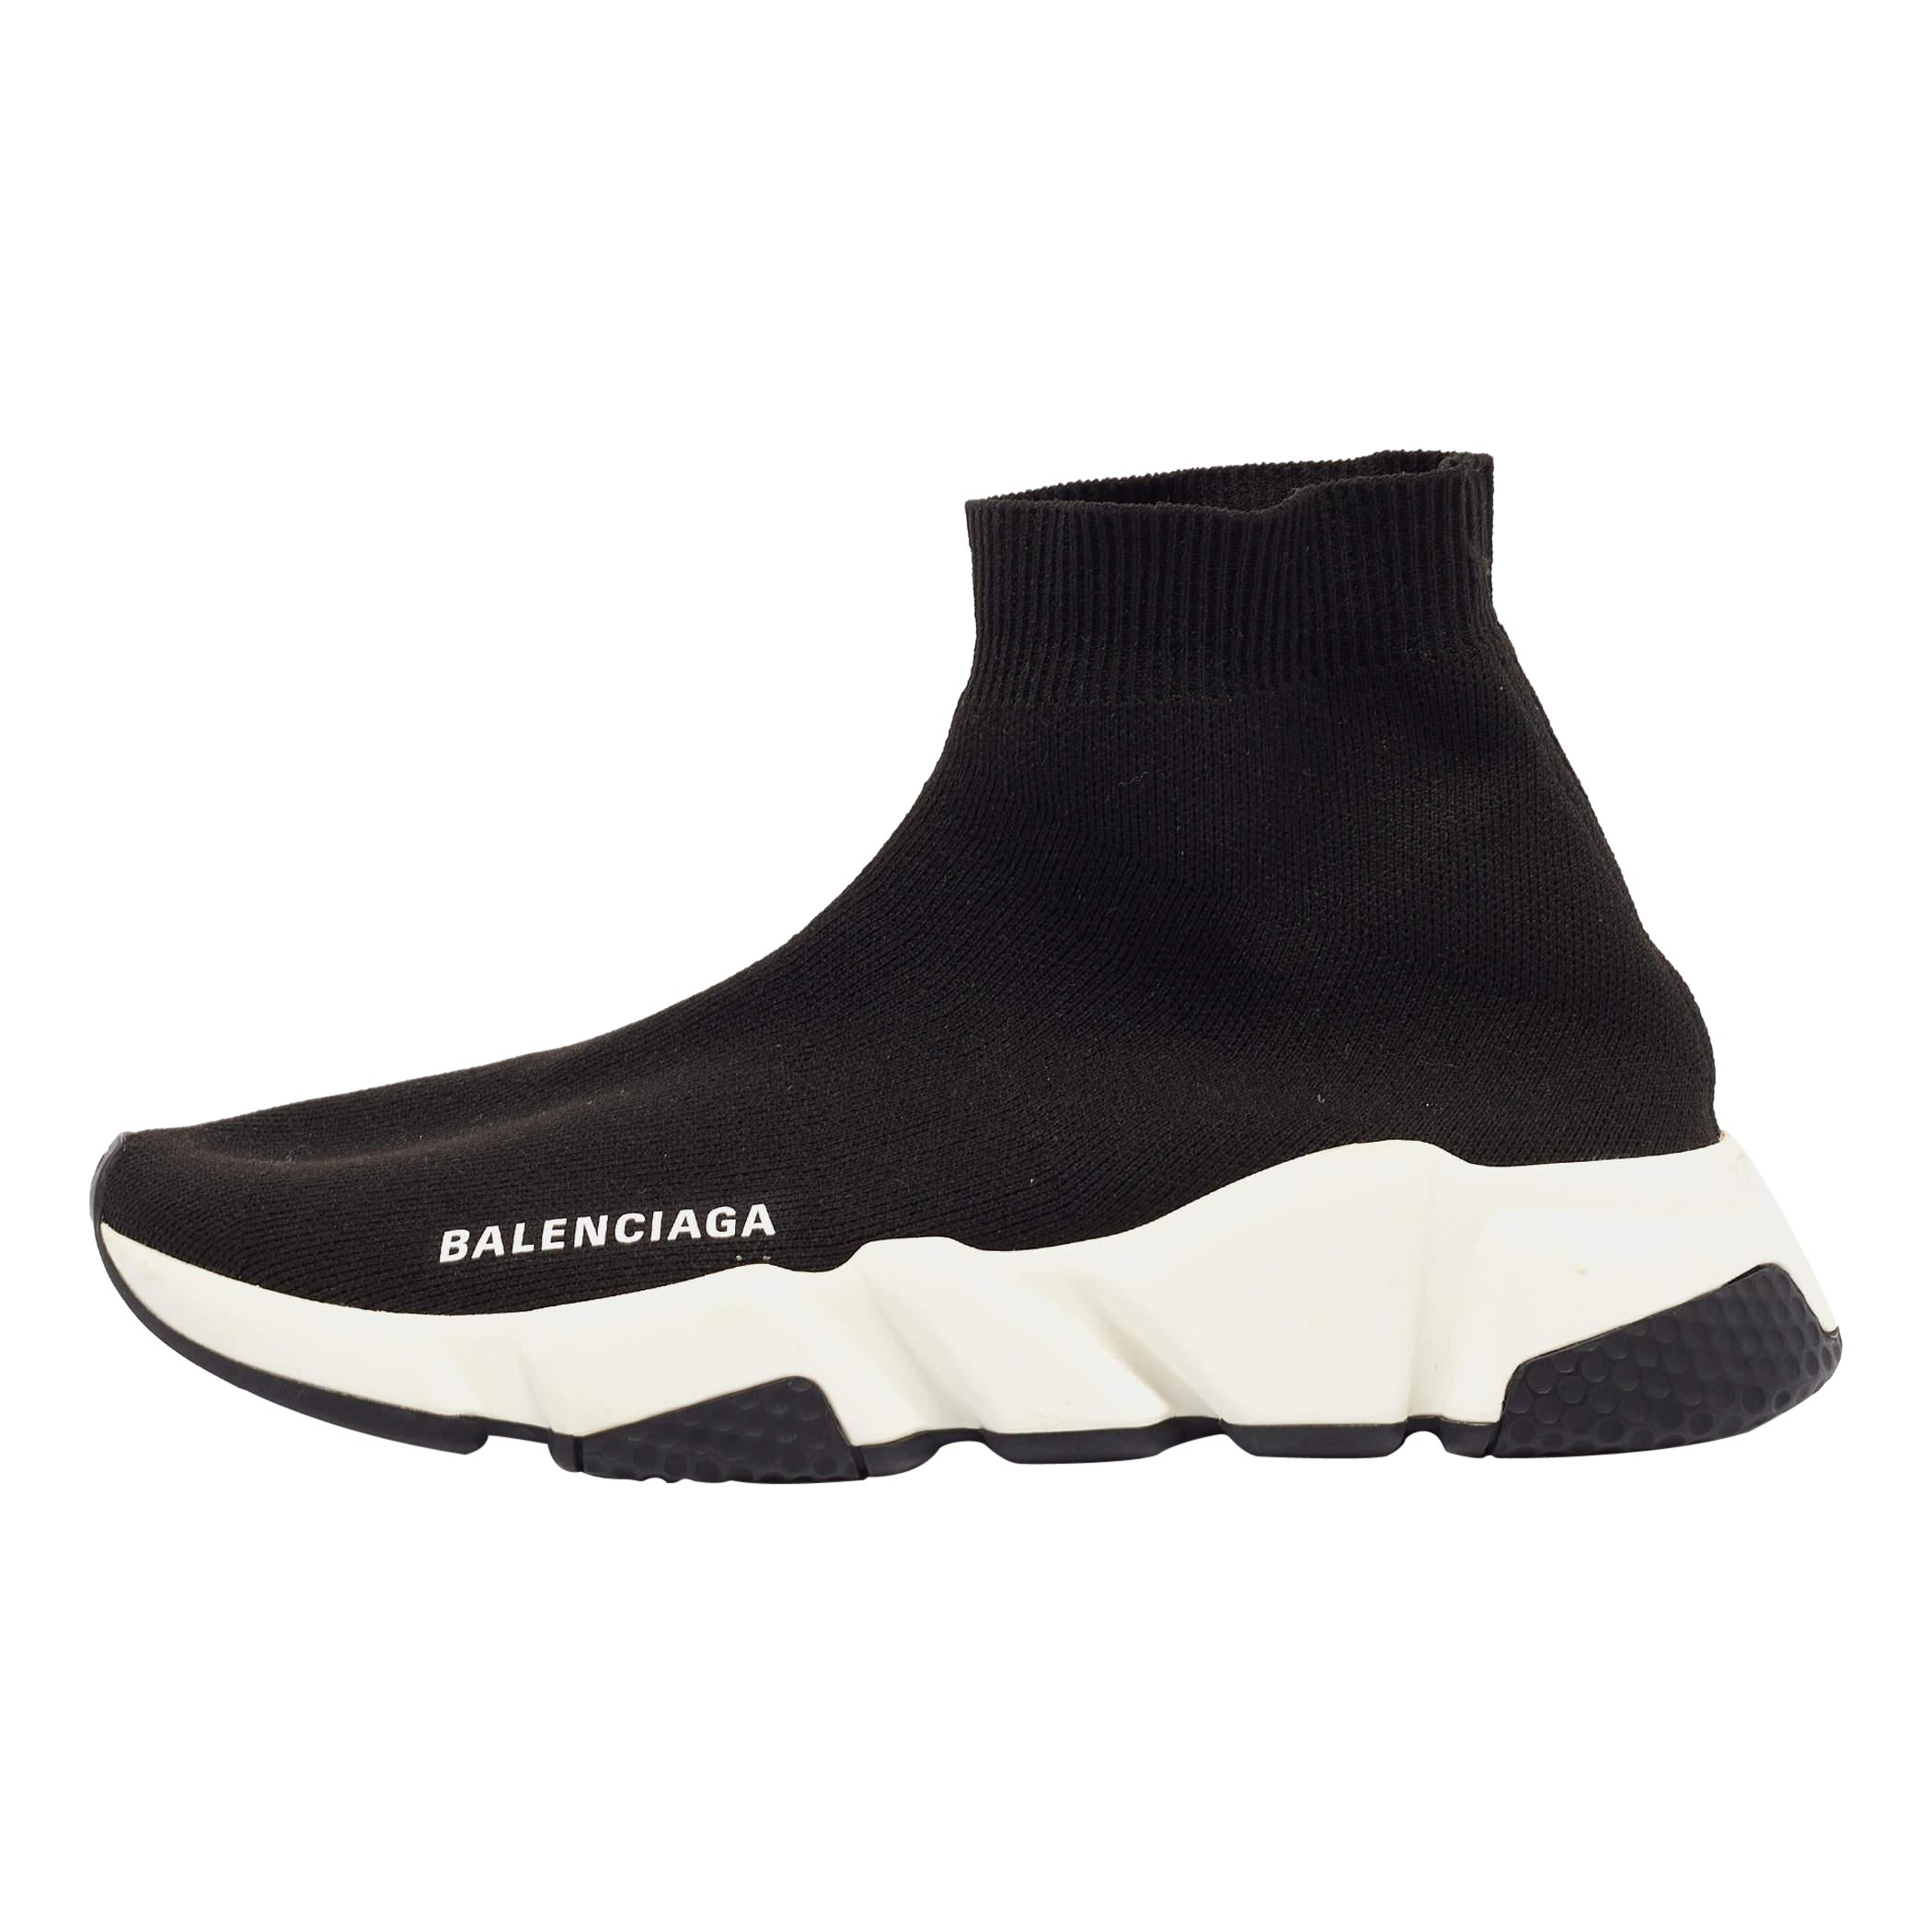 What is so great about Balenciaga?